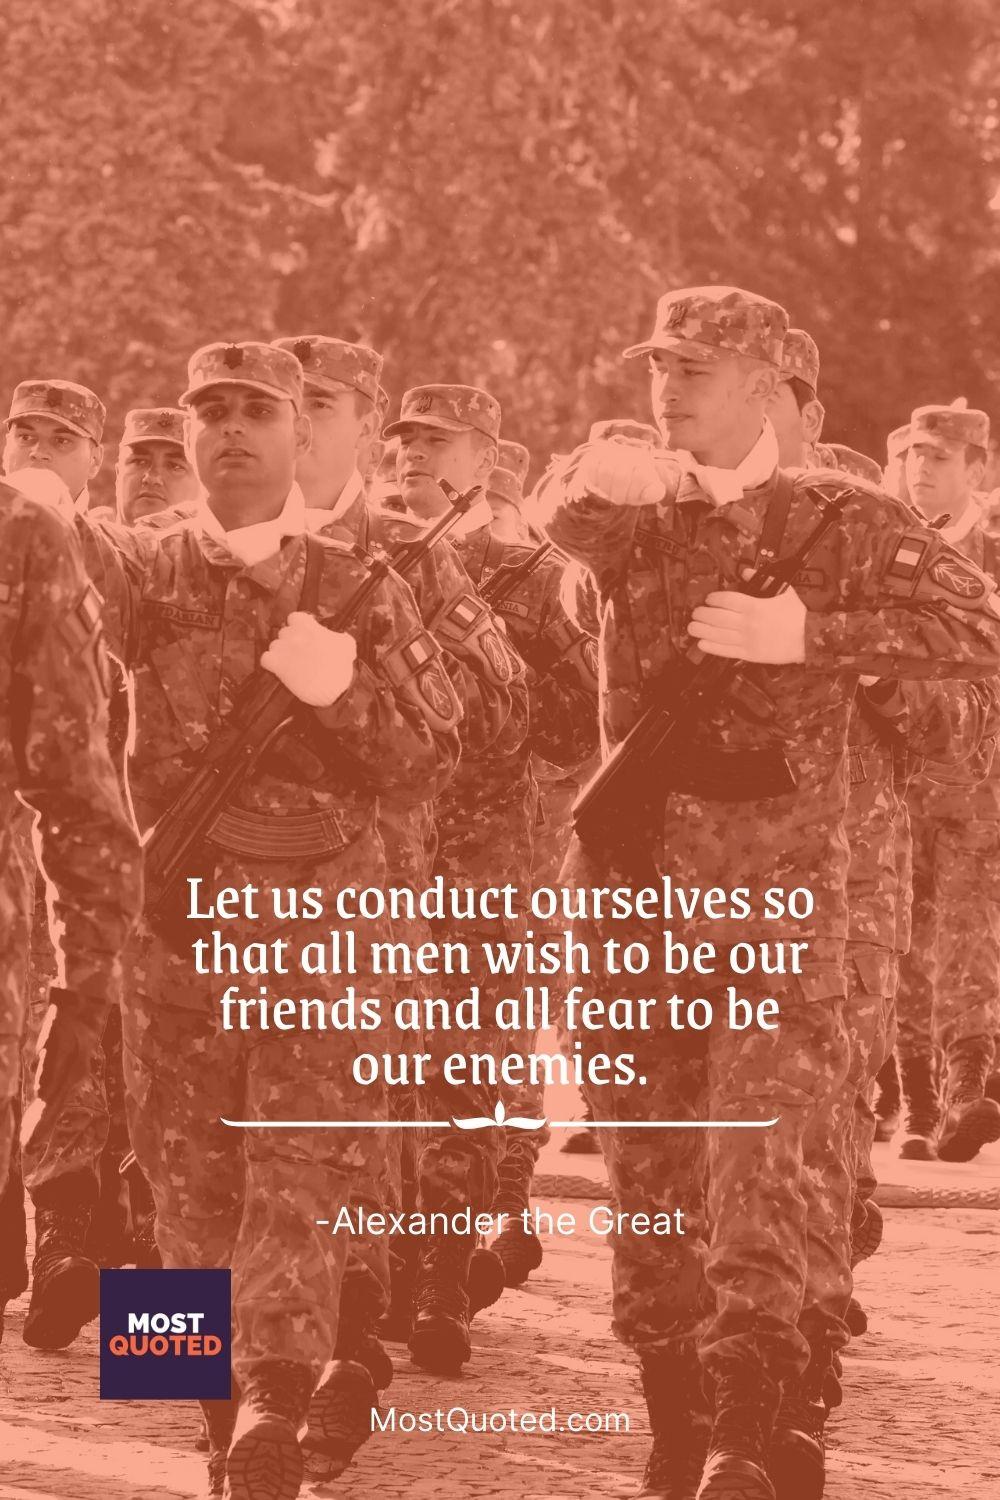 Let us conduct ourselves so that all men wish to be our friends and all fear to be our enemies. - Alexander the Great